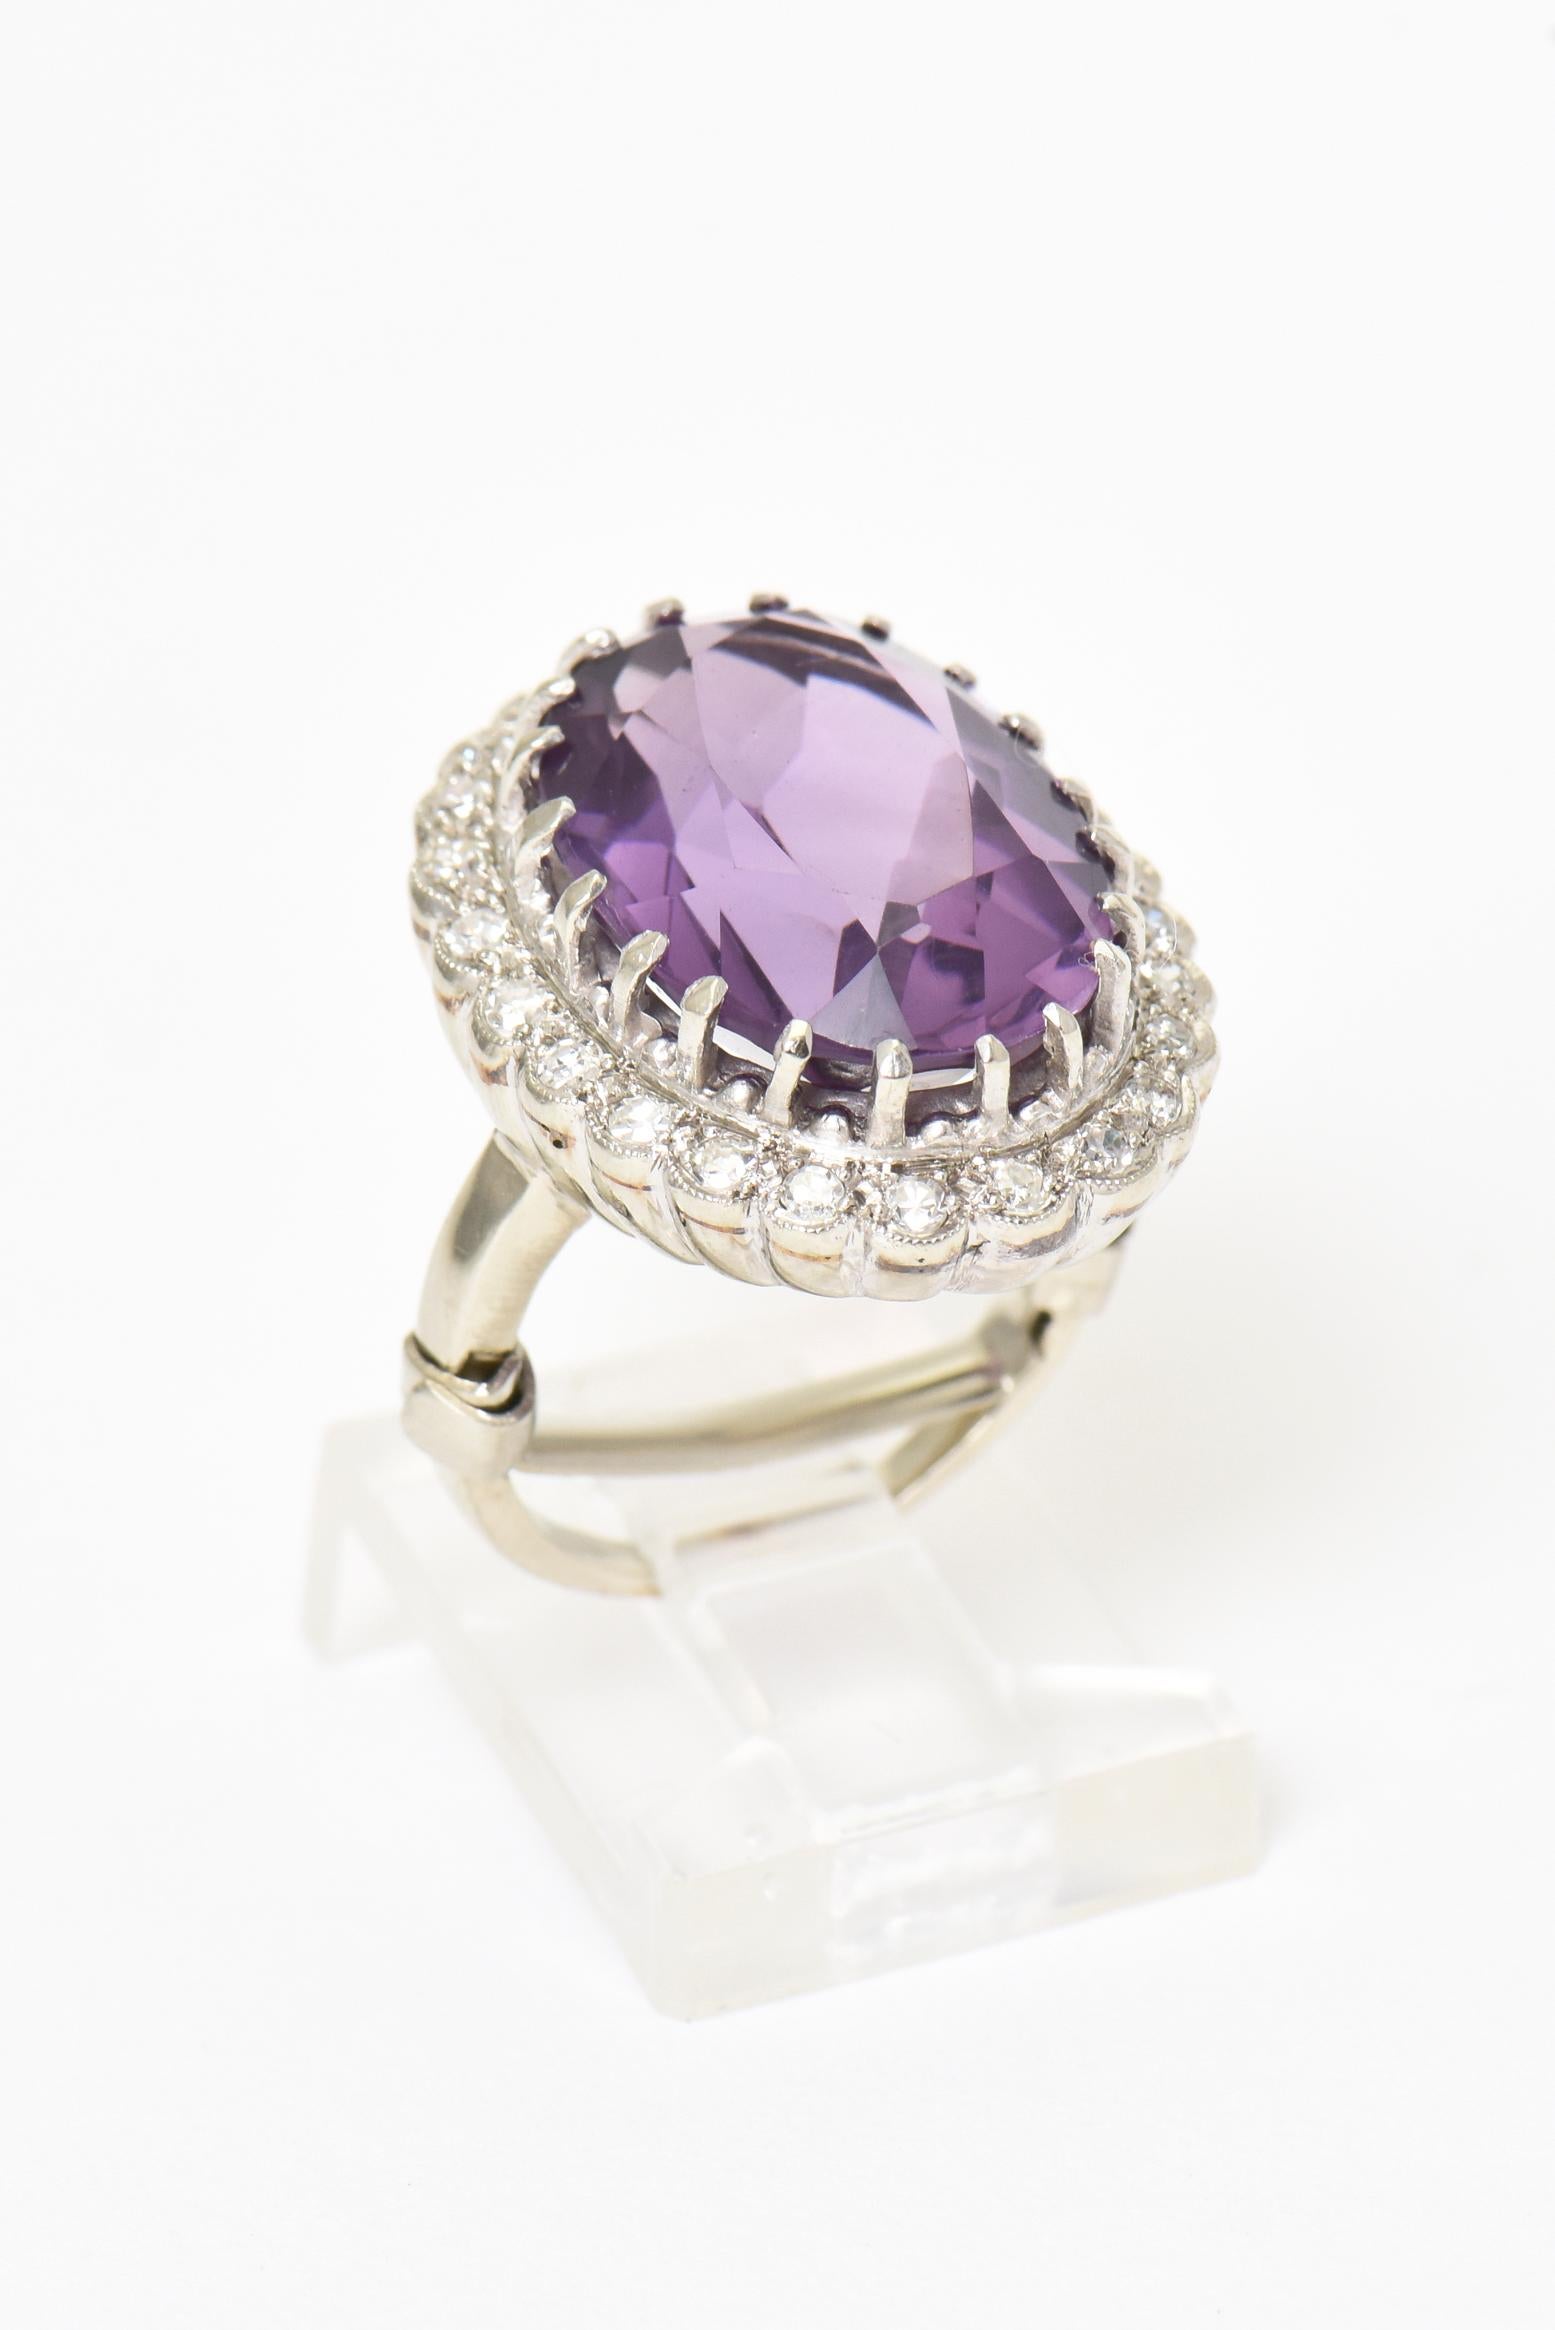 Beautiful color purple oval faceted amethyst prong mounted in a diamond 14k white gold frame. The frame has 23 single cut diamonds weighting approximately .34 carat in total weight for the piece. Marked 14k.  IT measures .94